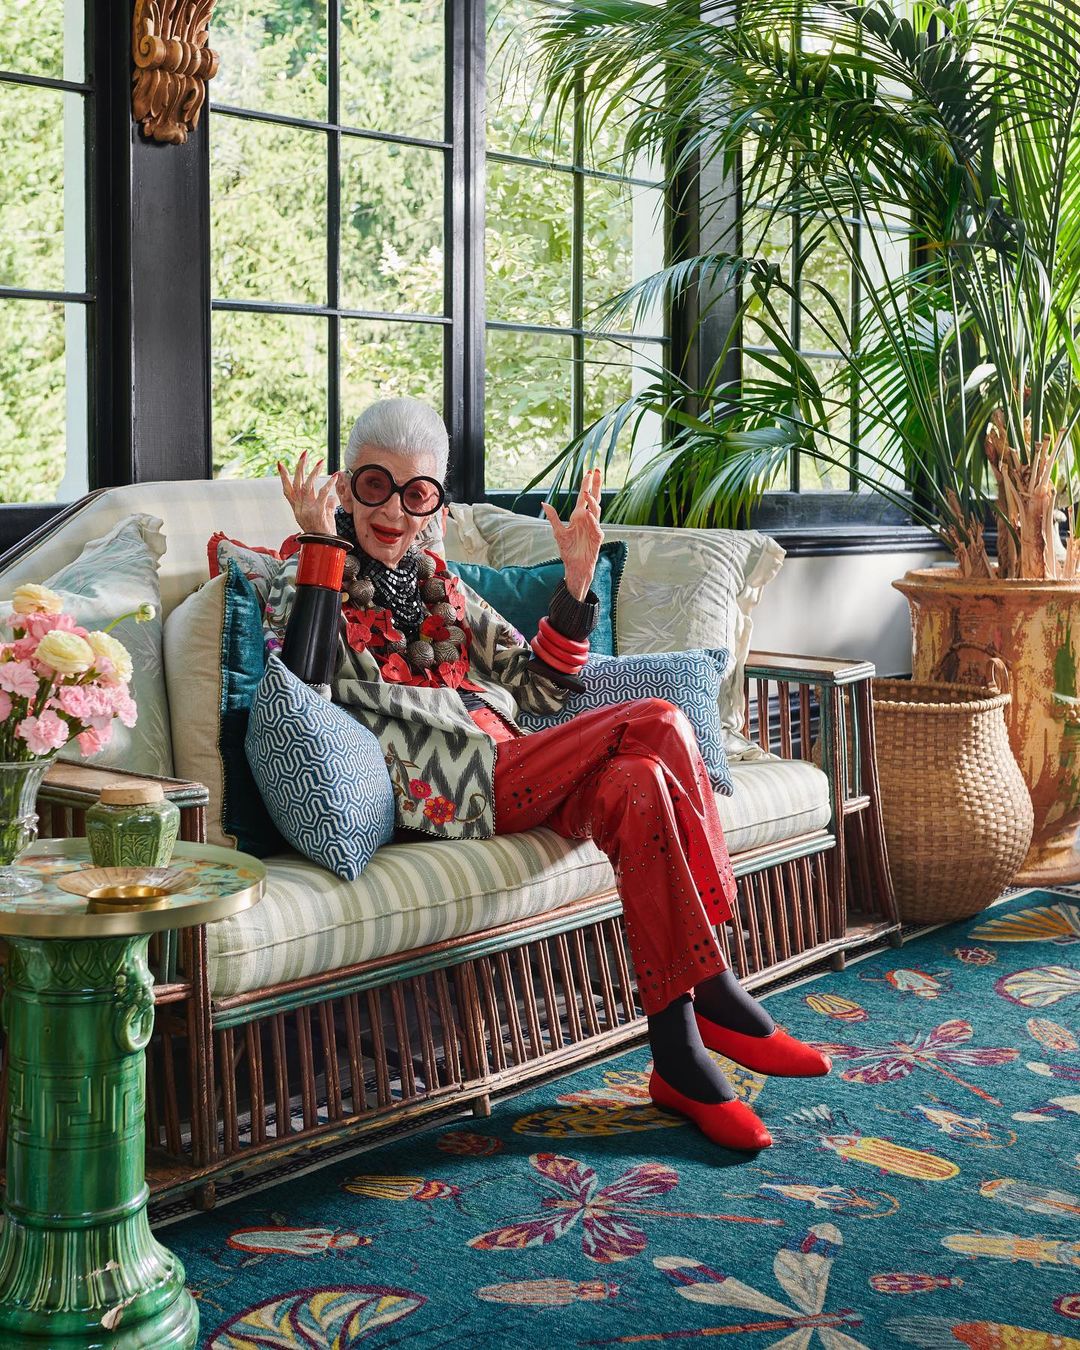 Iris Apfel was an interior designer and style icon